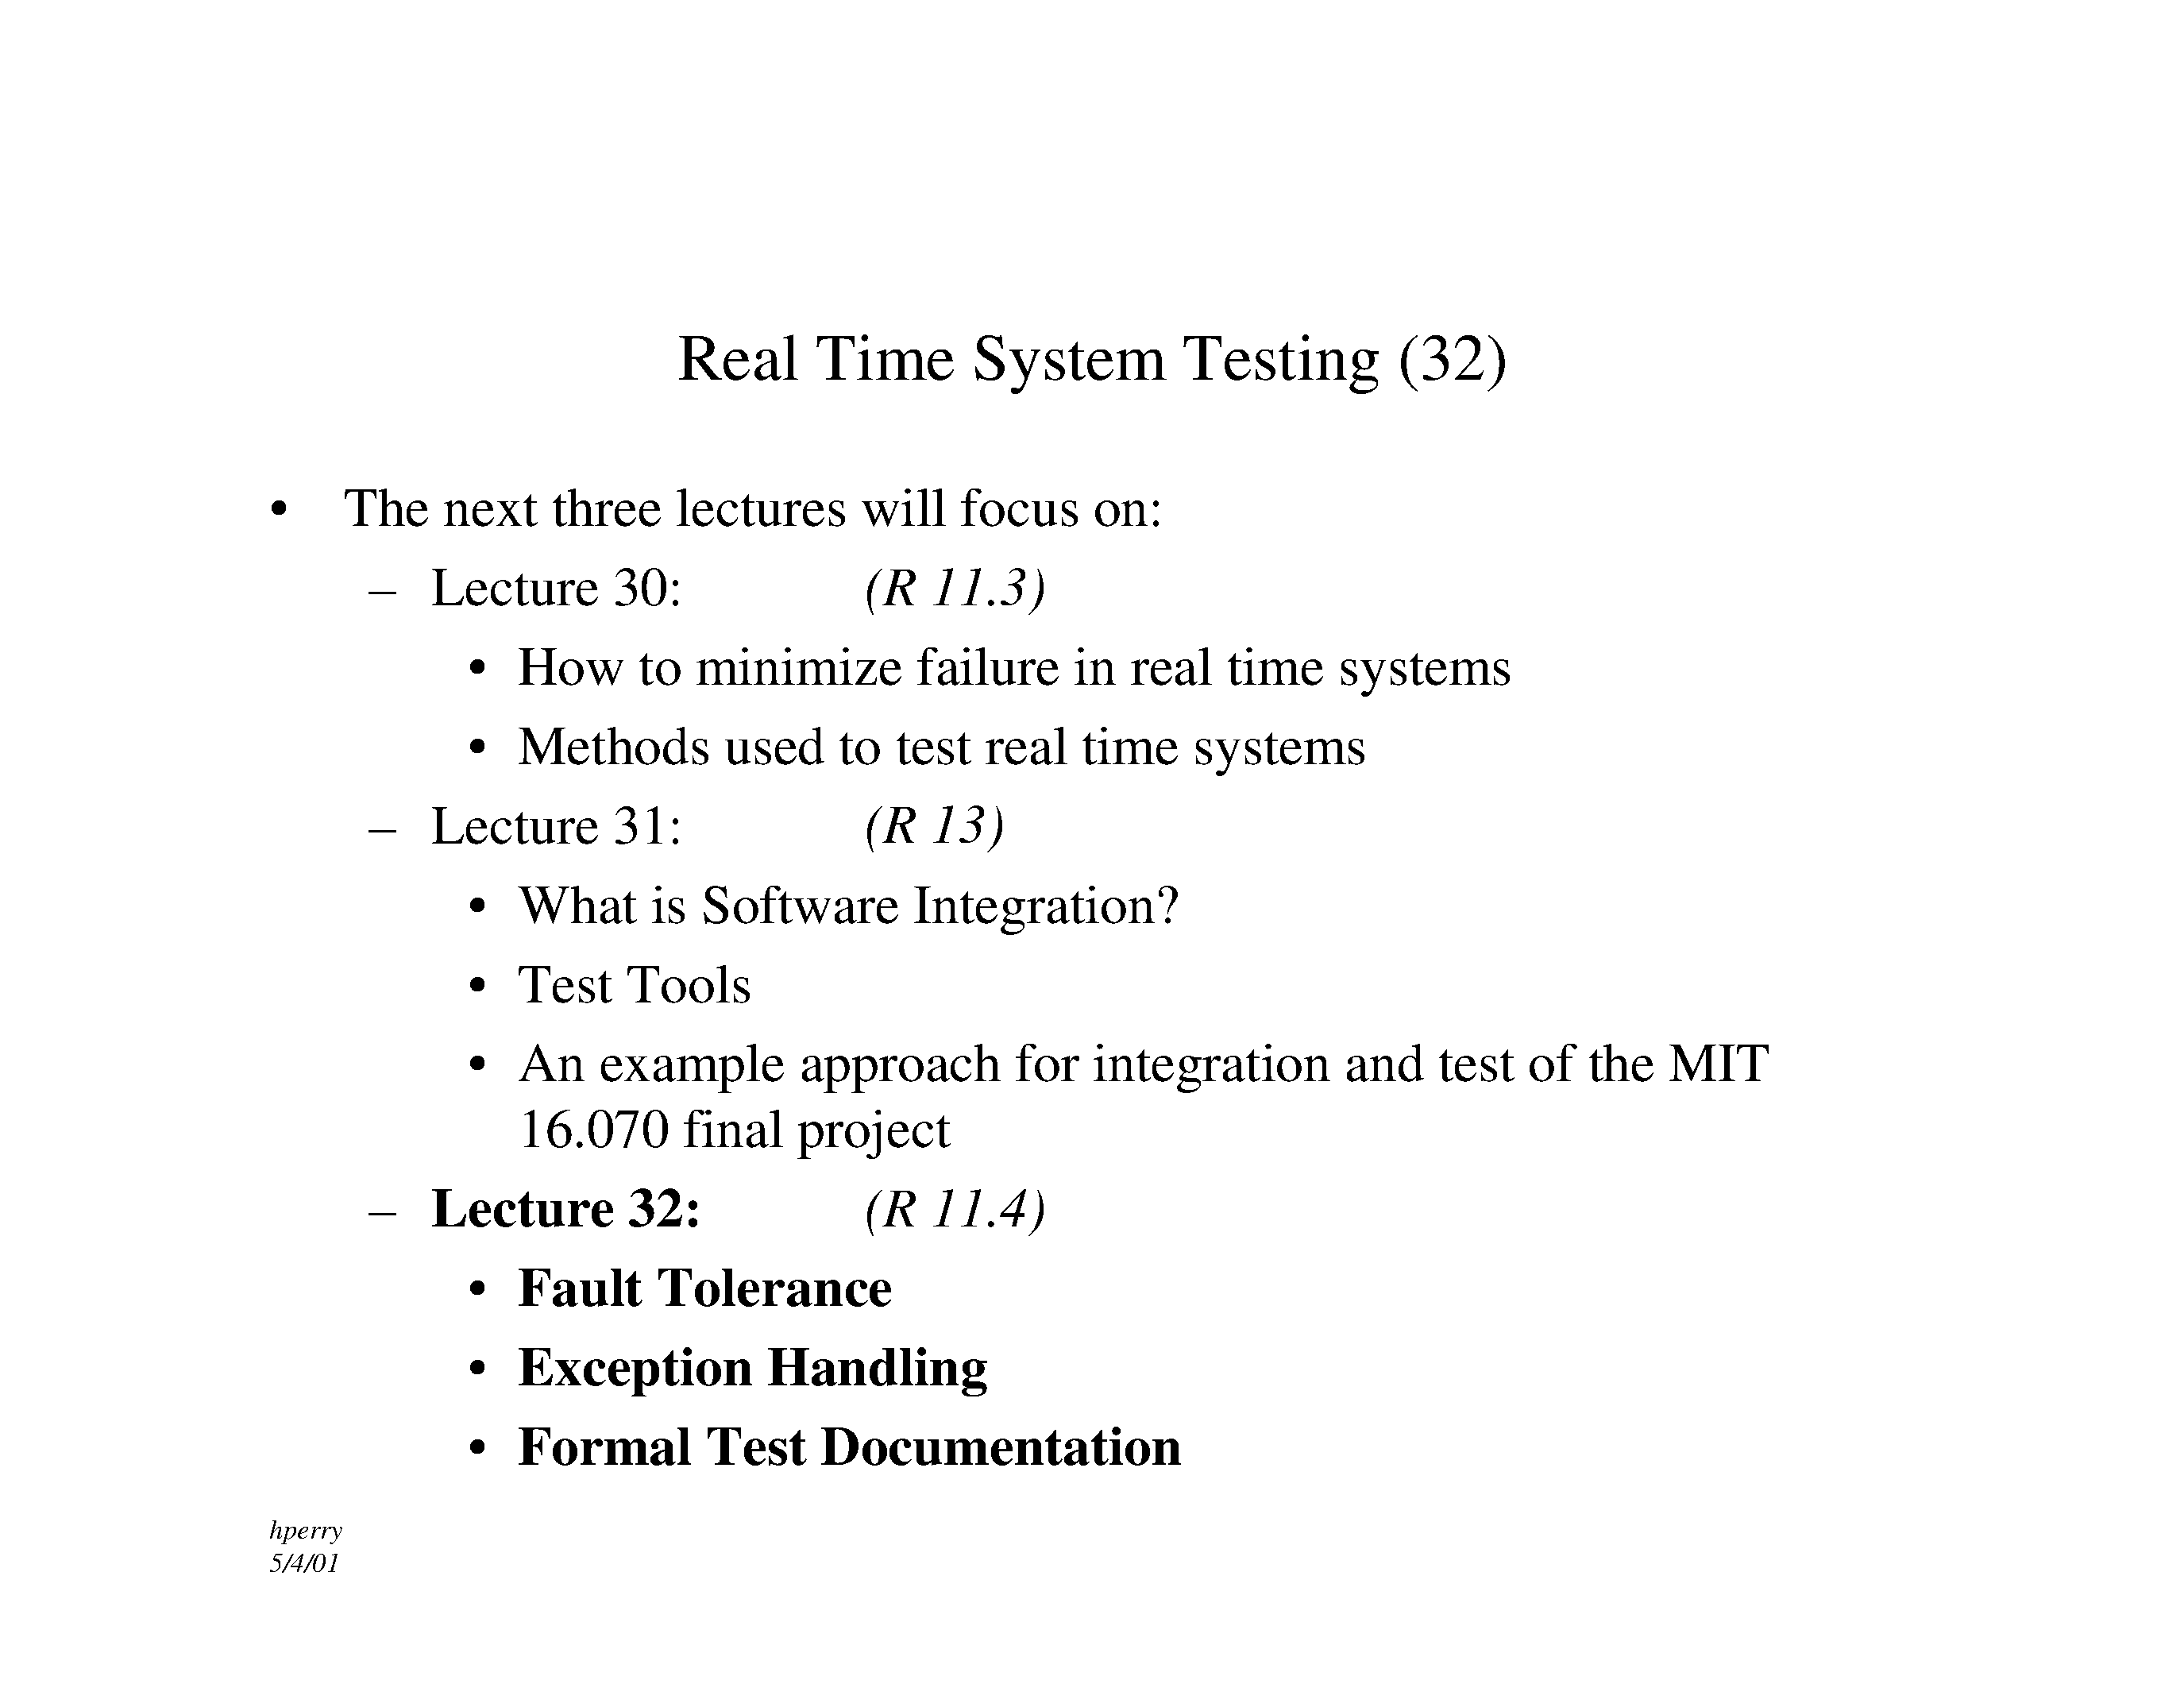 Даташит TL32 - Real Time System Testing MIT 16.070 Lecture 32 страница 2